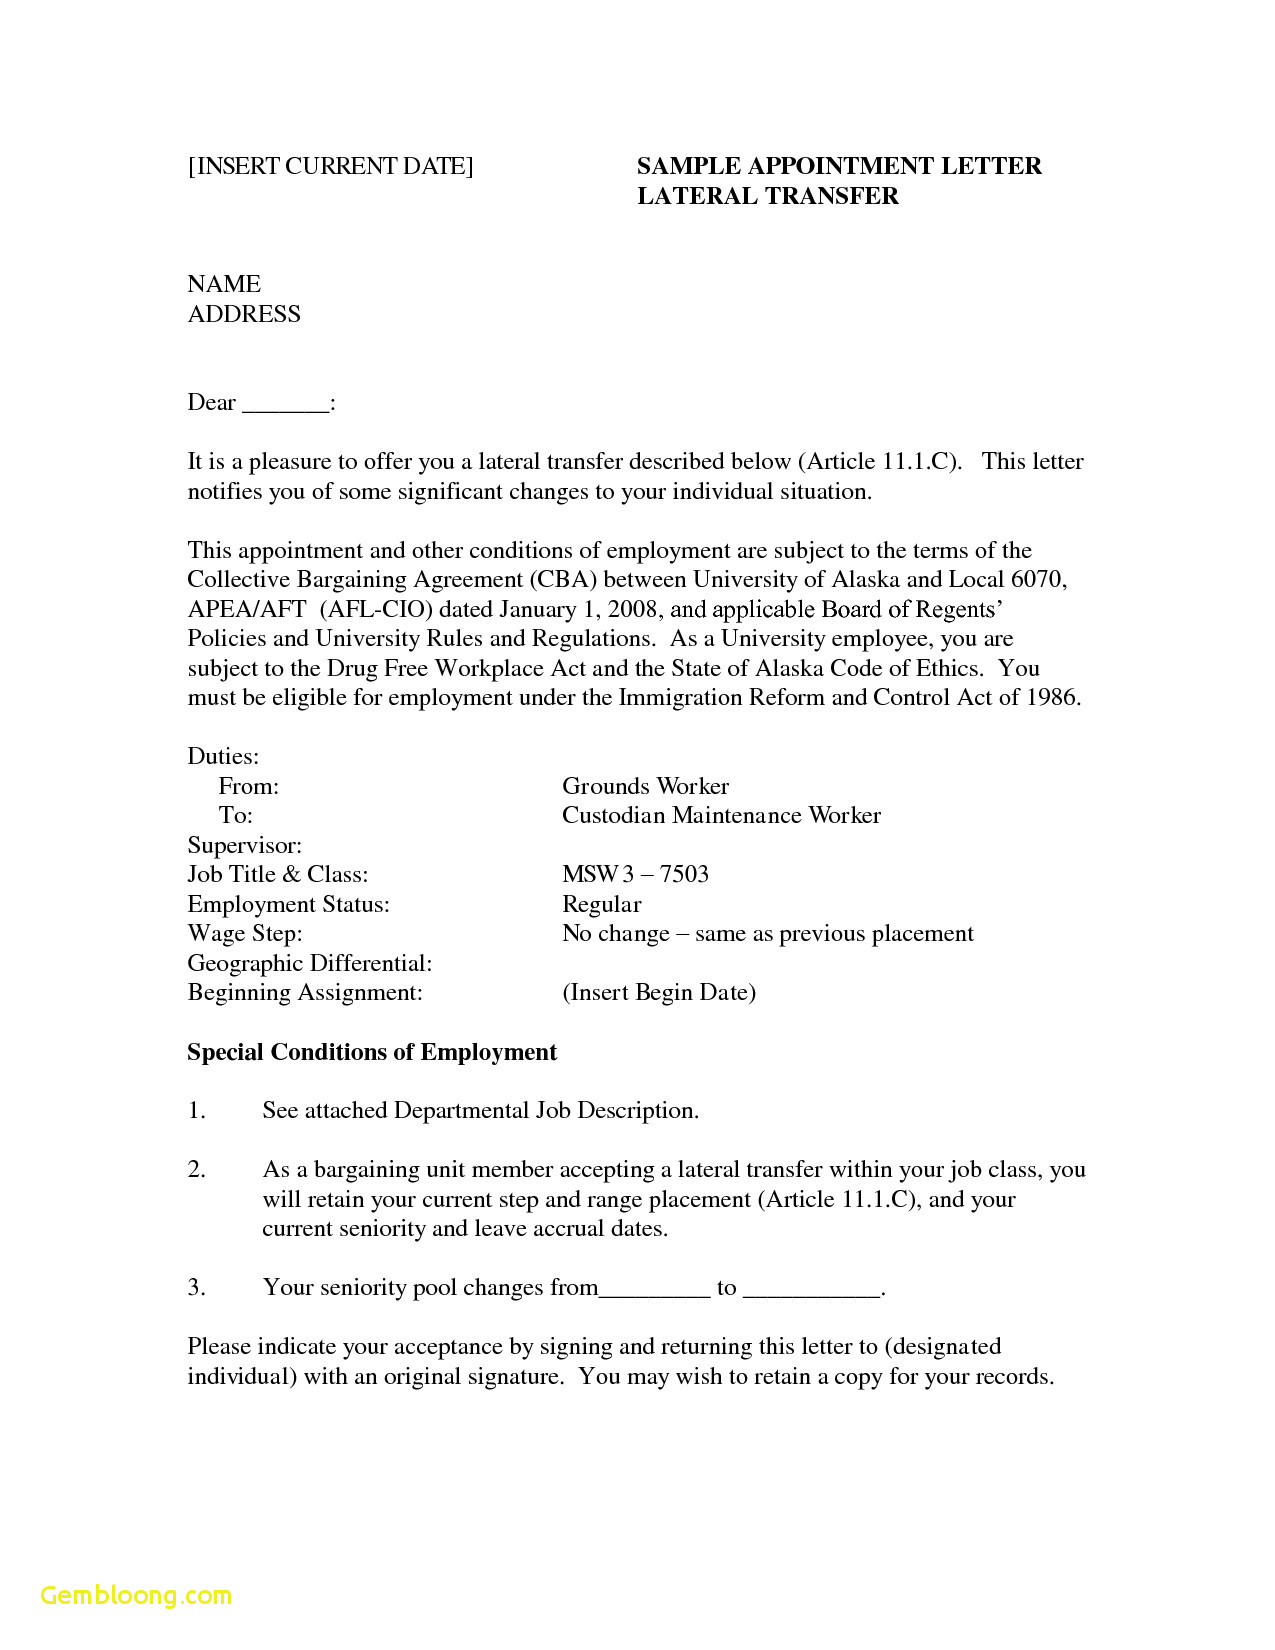 application-letter-template-word-examples-letter-template-collection